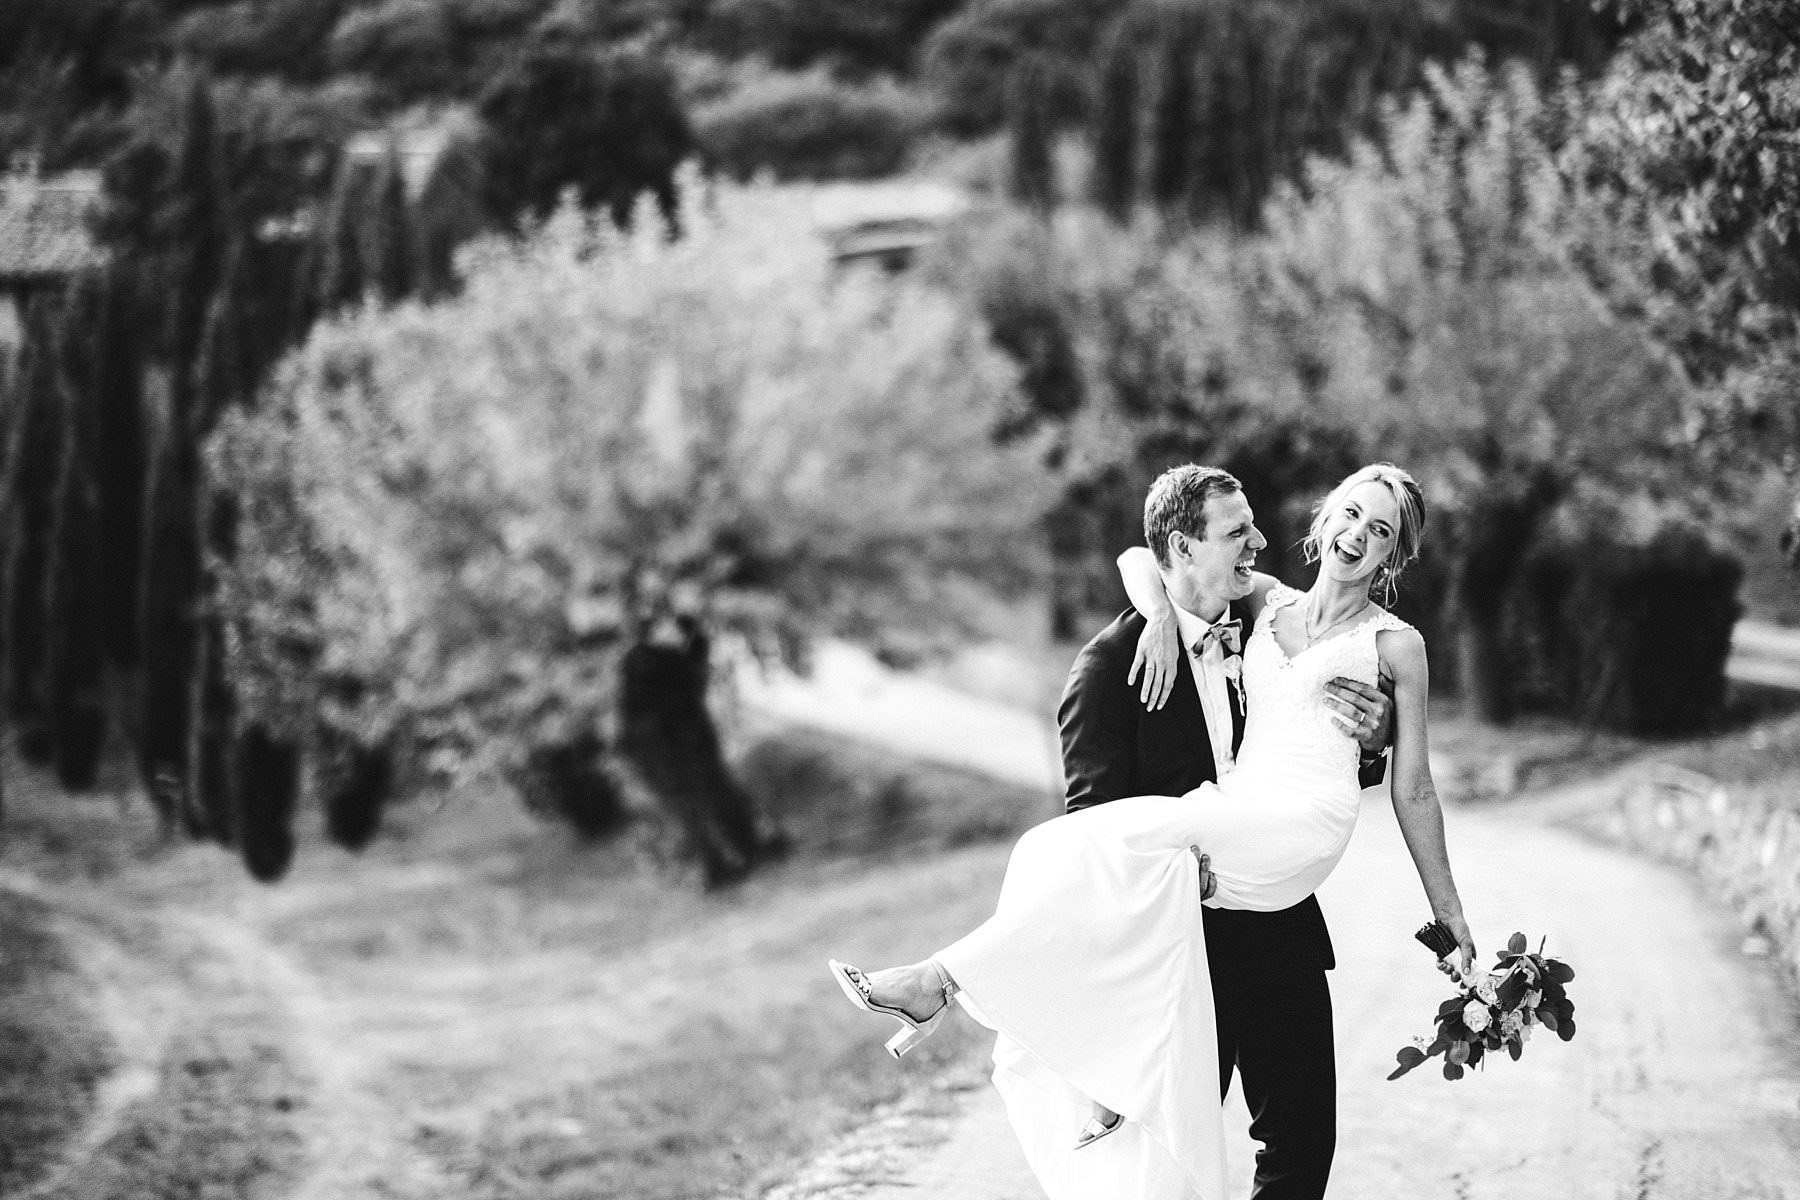 An unforgettable international wedding. Elegant Australian couple reportage wedding photo around the property of Villa Monte Solare, a historic residence tucked in the countryside among rolling hills. The settings were countryside landscapes with cypress lines, olive groves and a stunning wall covered in red ivy leaves